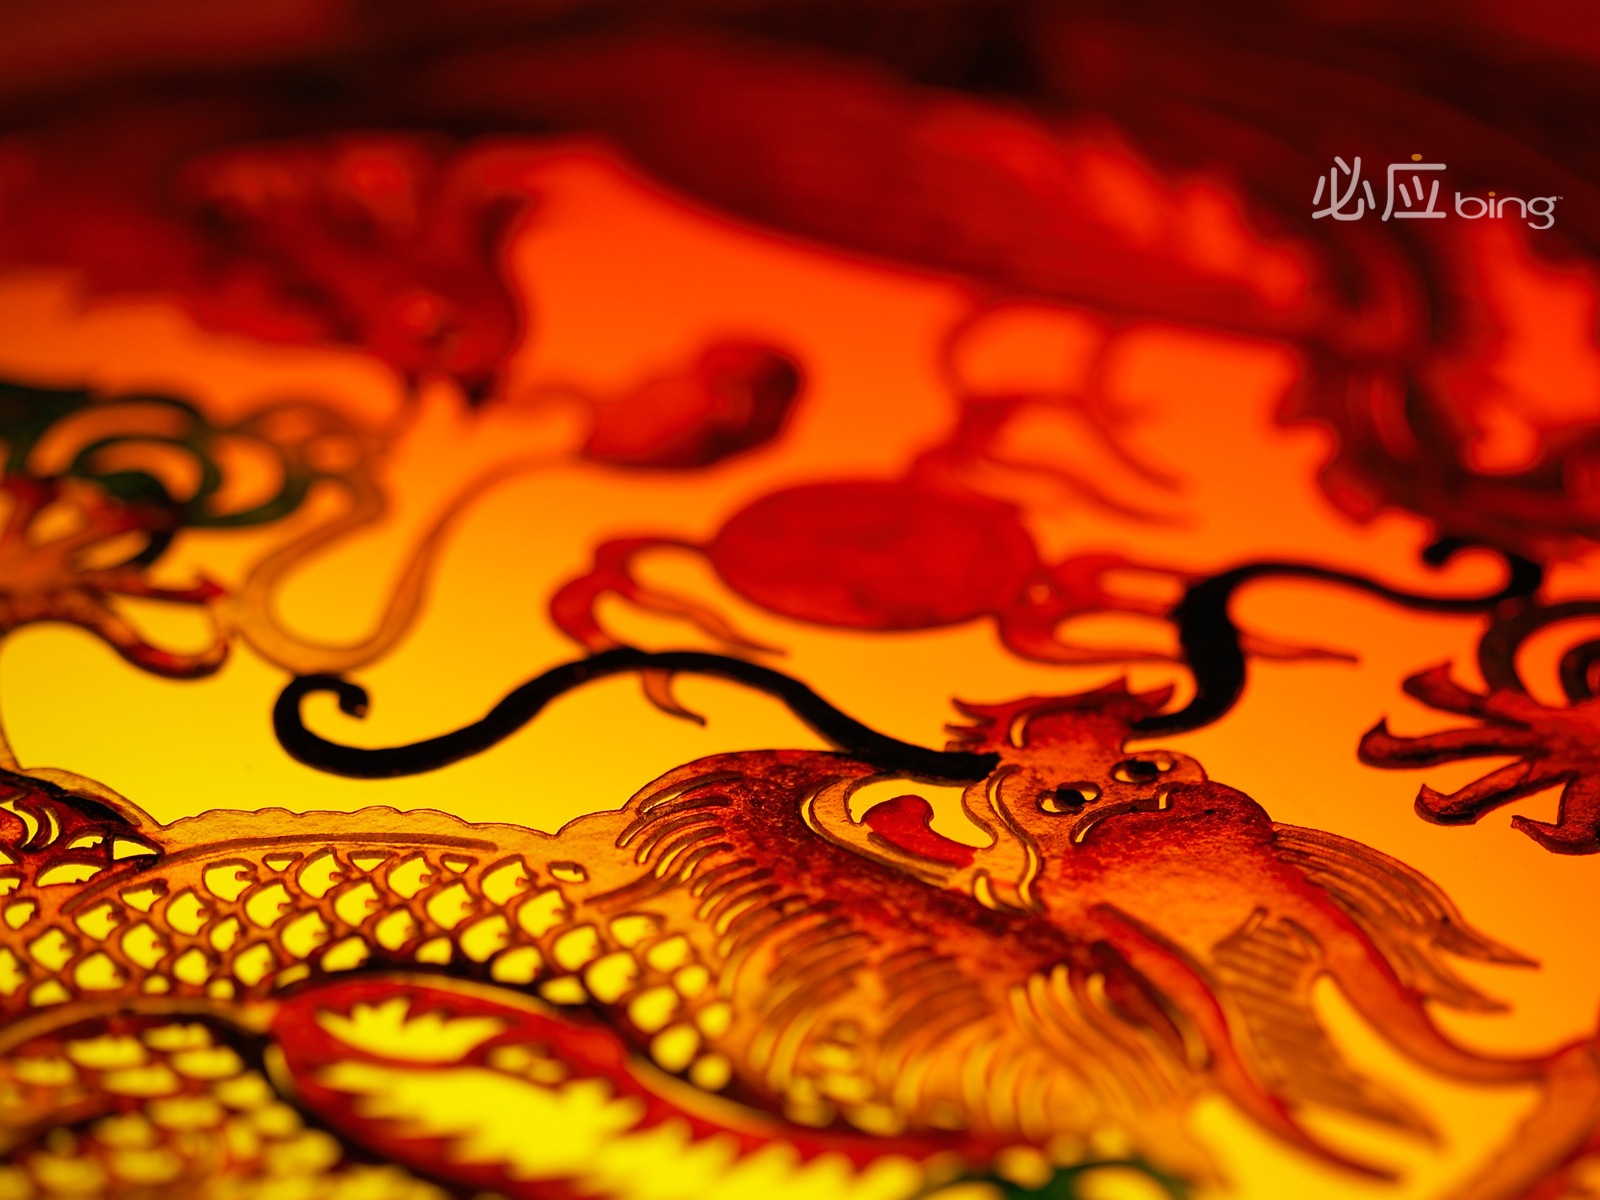 Bing selection best HD wallpapers: China theme wallpaper (2) #12 - 1600x1200